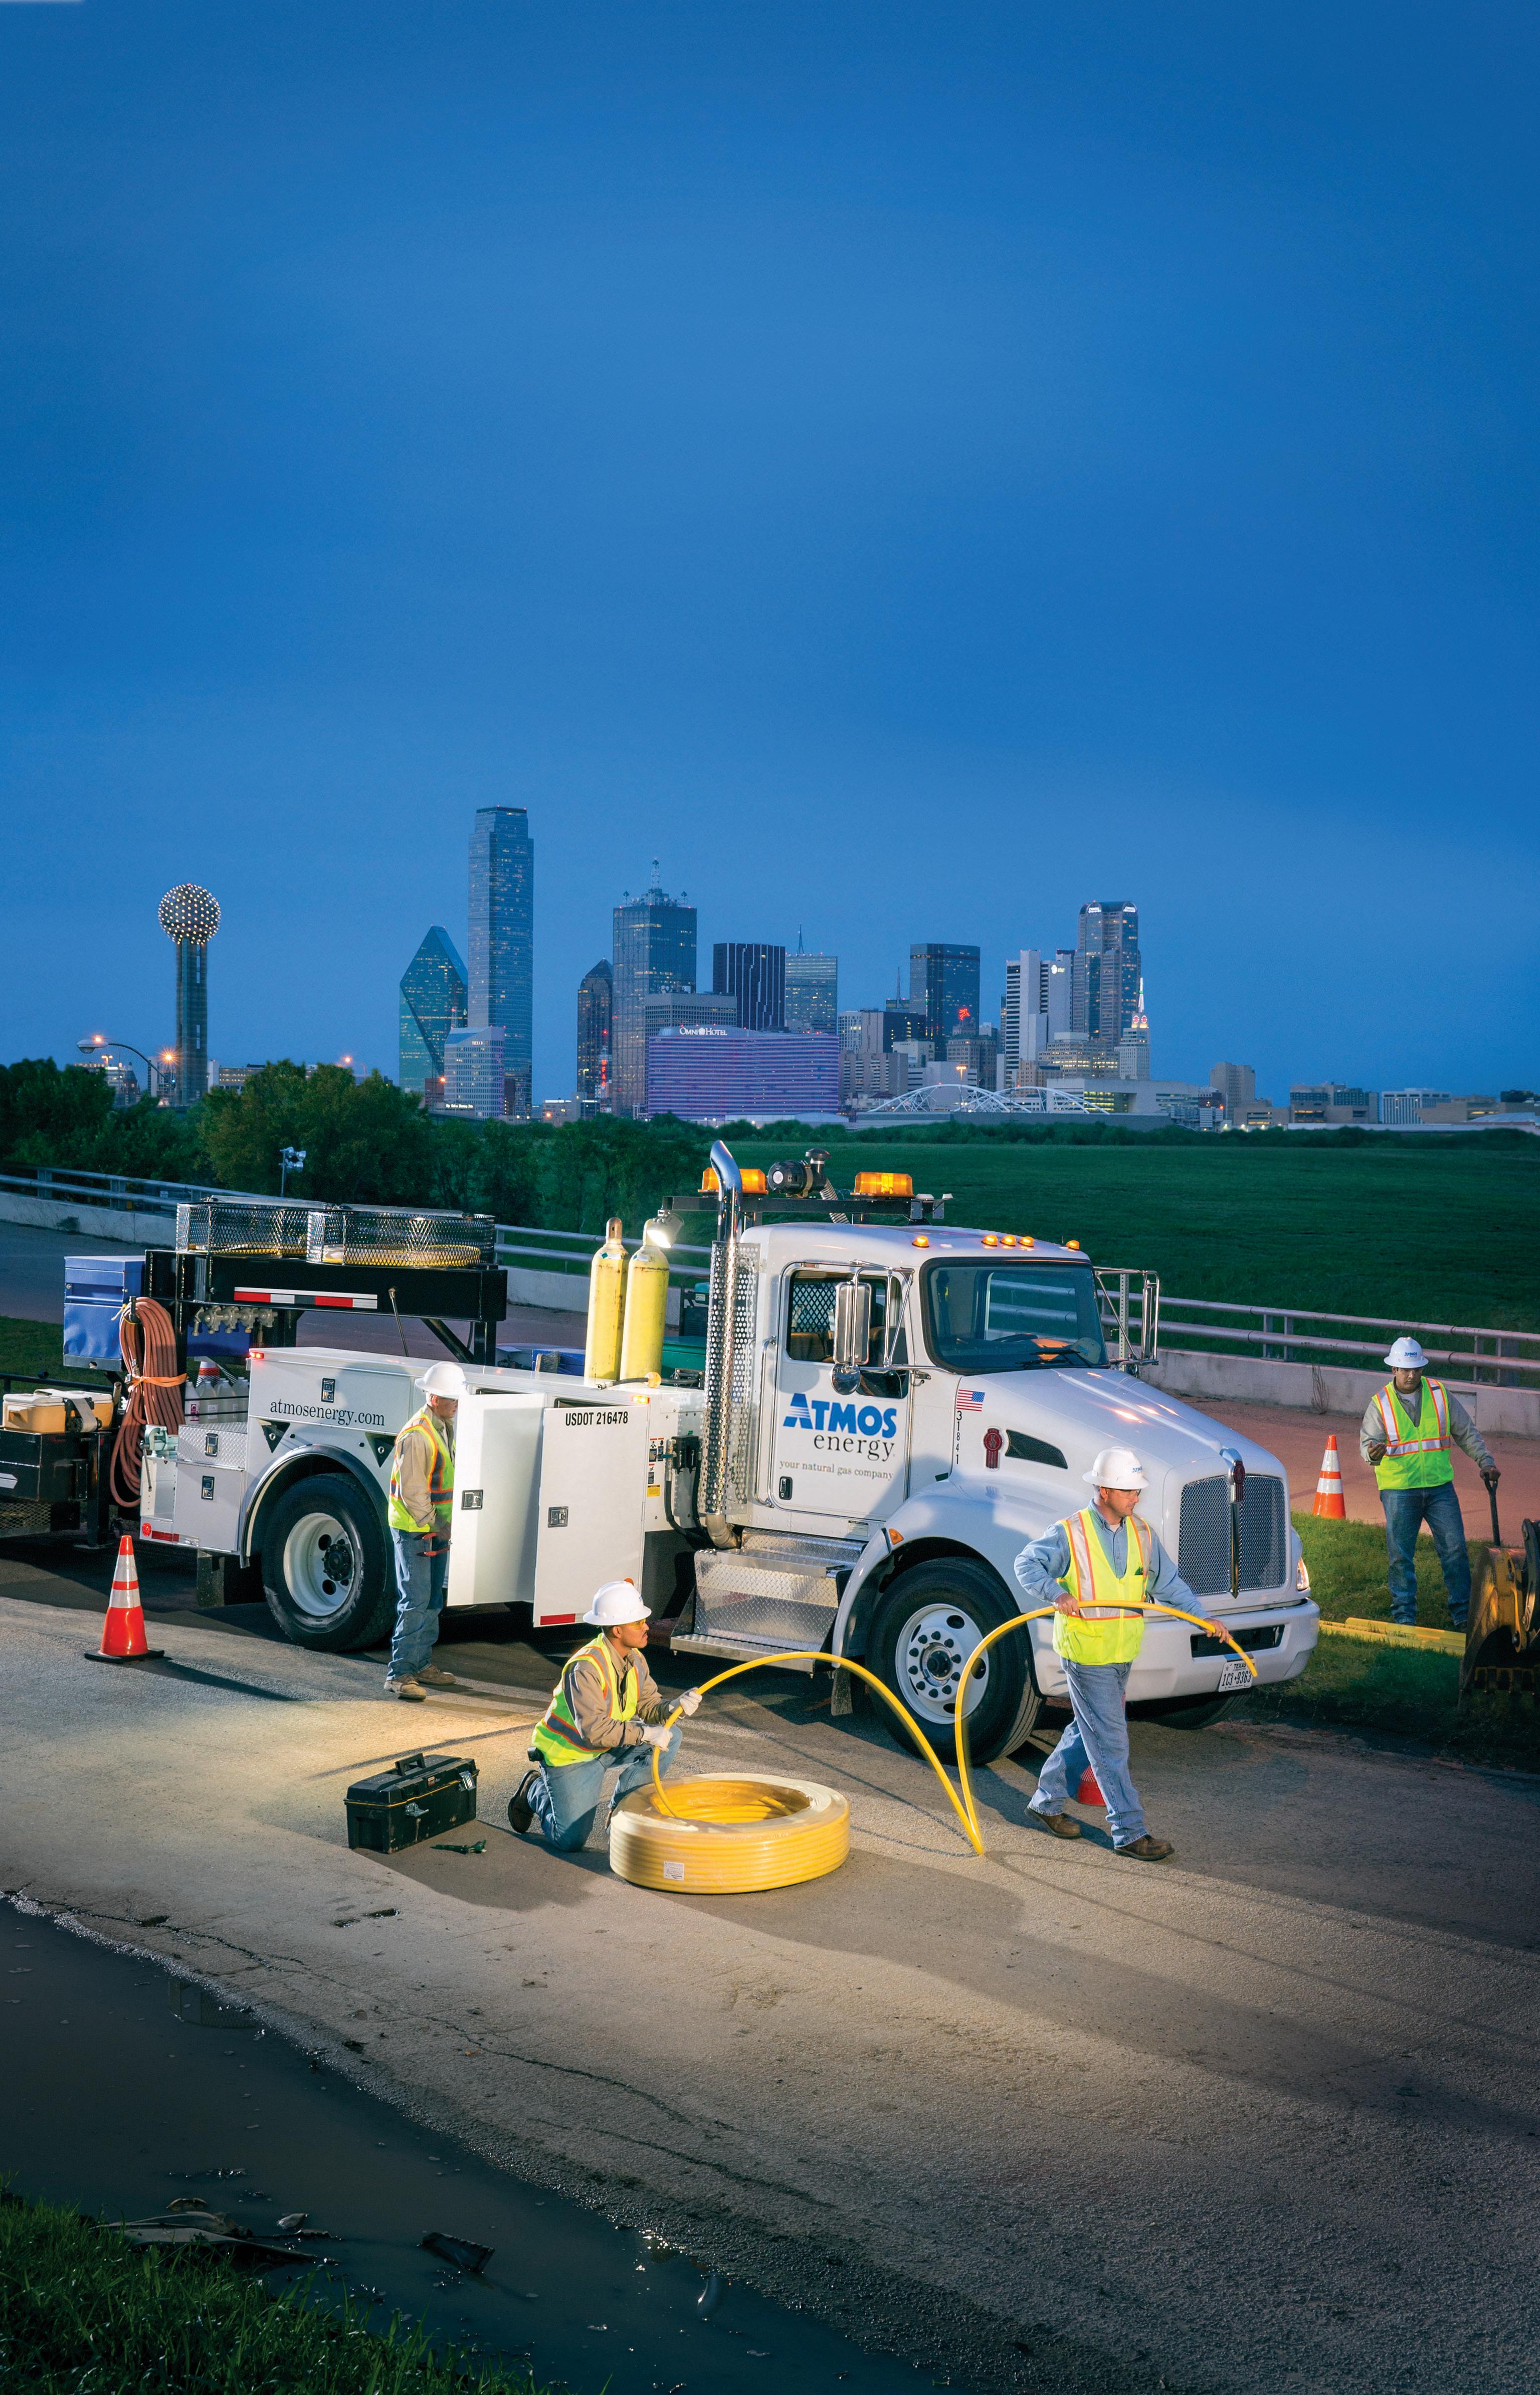 Atmos Energy crew working in the evening in front of downtown Dallas.